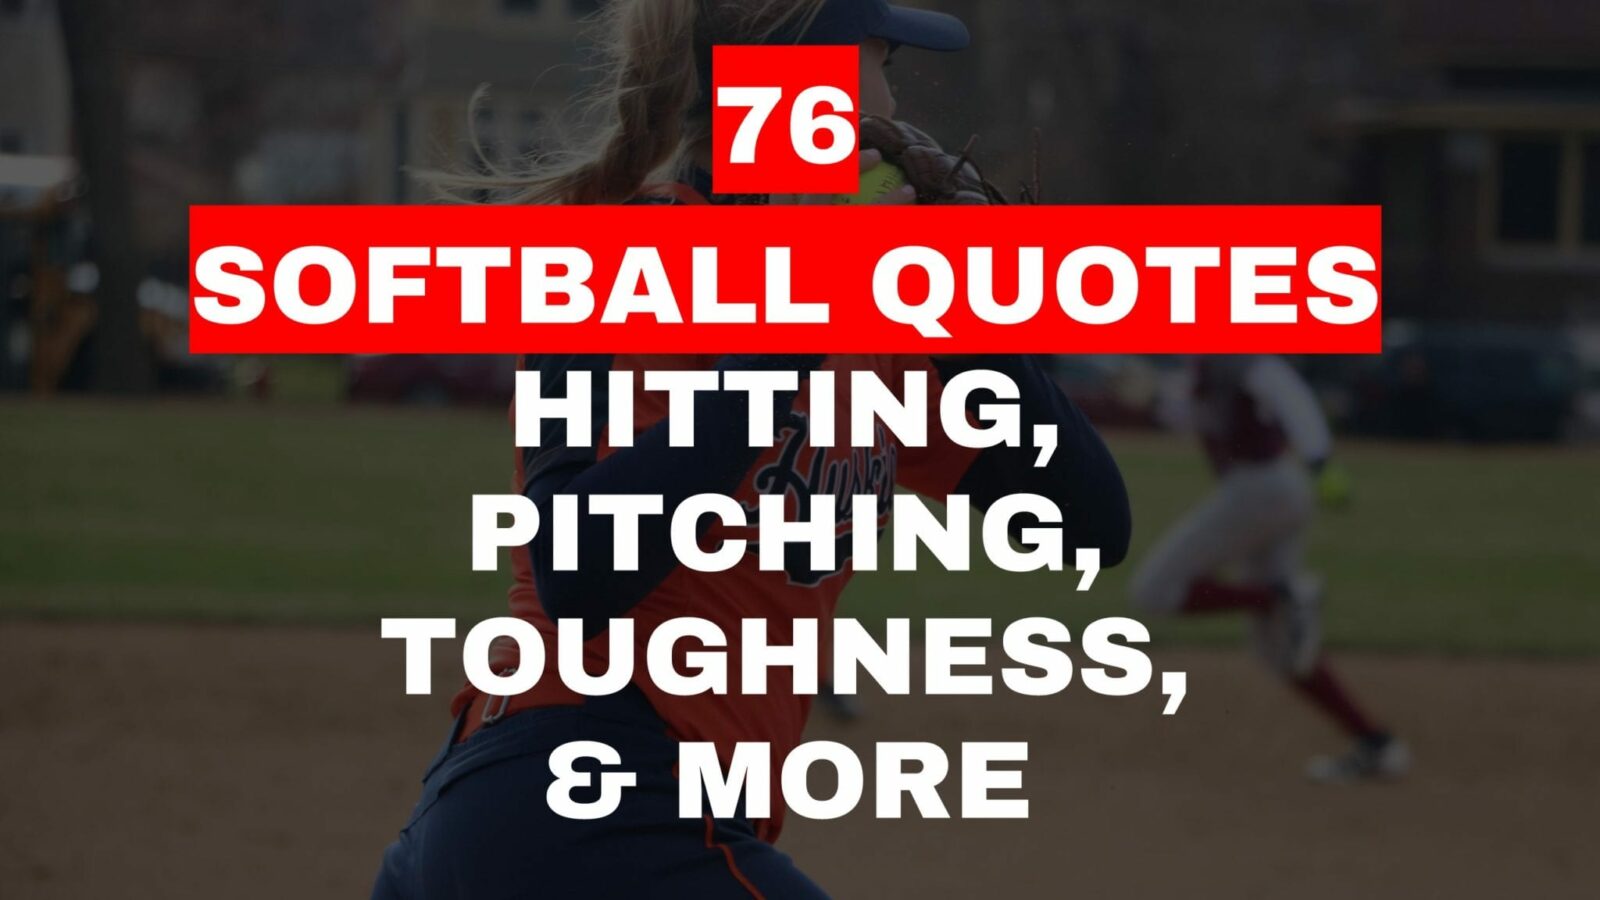 76 Quotes on Softball: Amazing Fastpitch Wisdom To Share